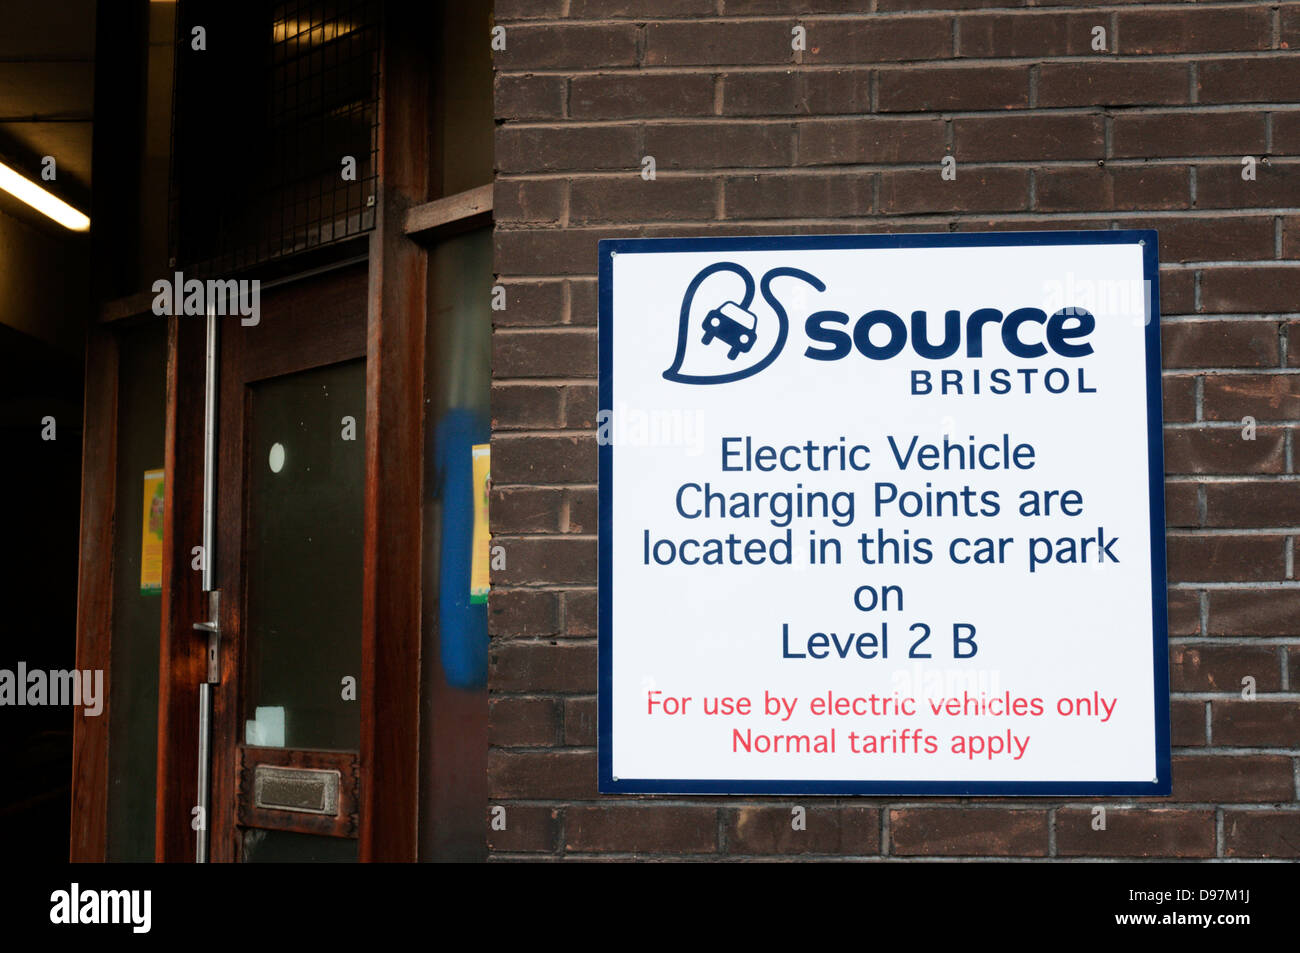 Sign for a charging point for electrical vehicles in a Bristol car park. Stock Photo